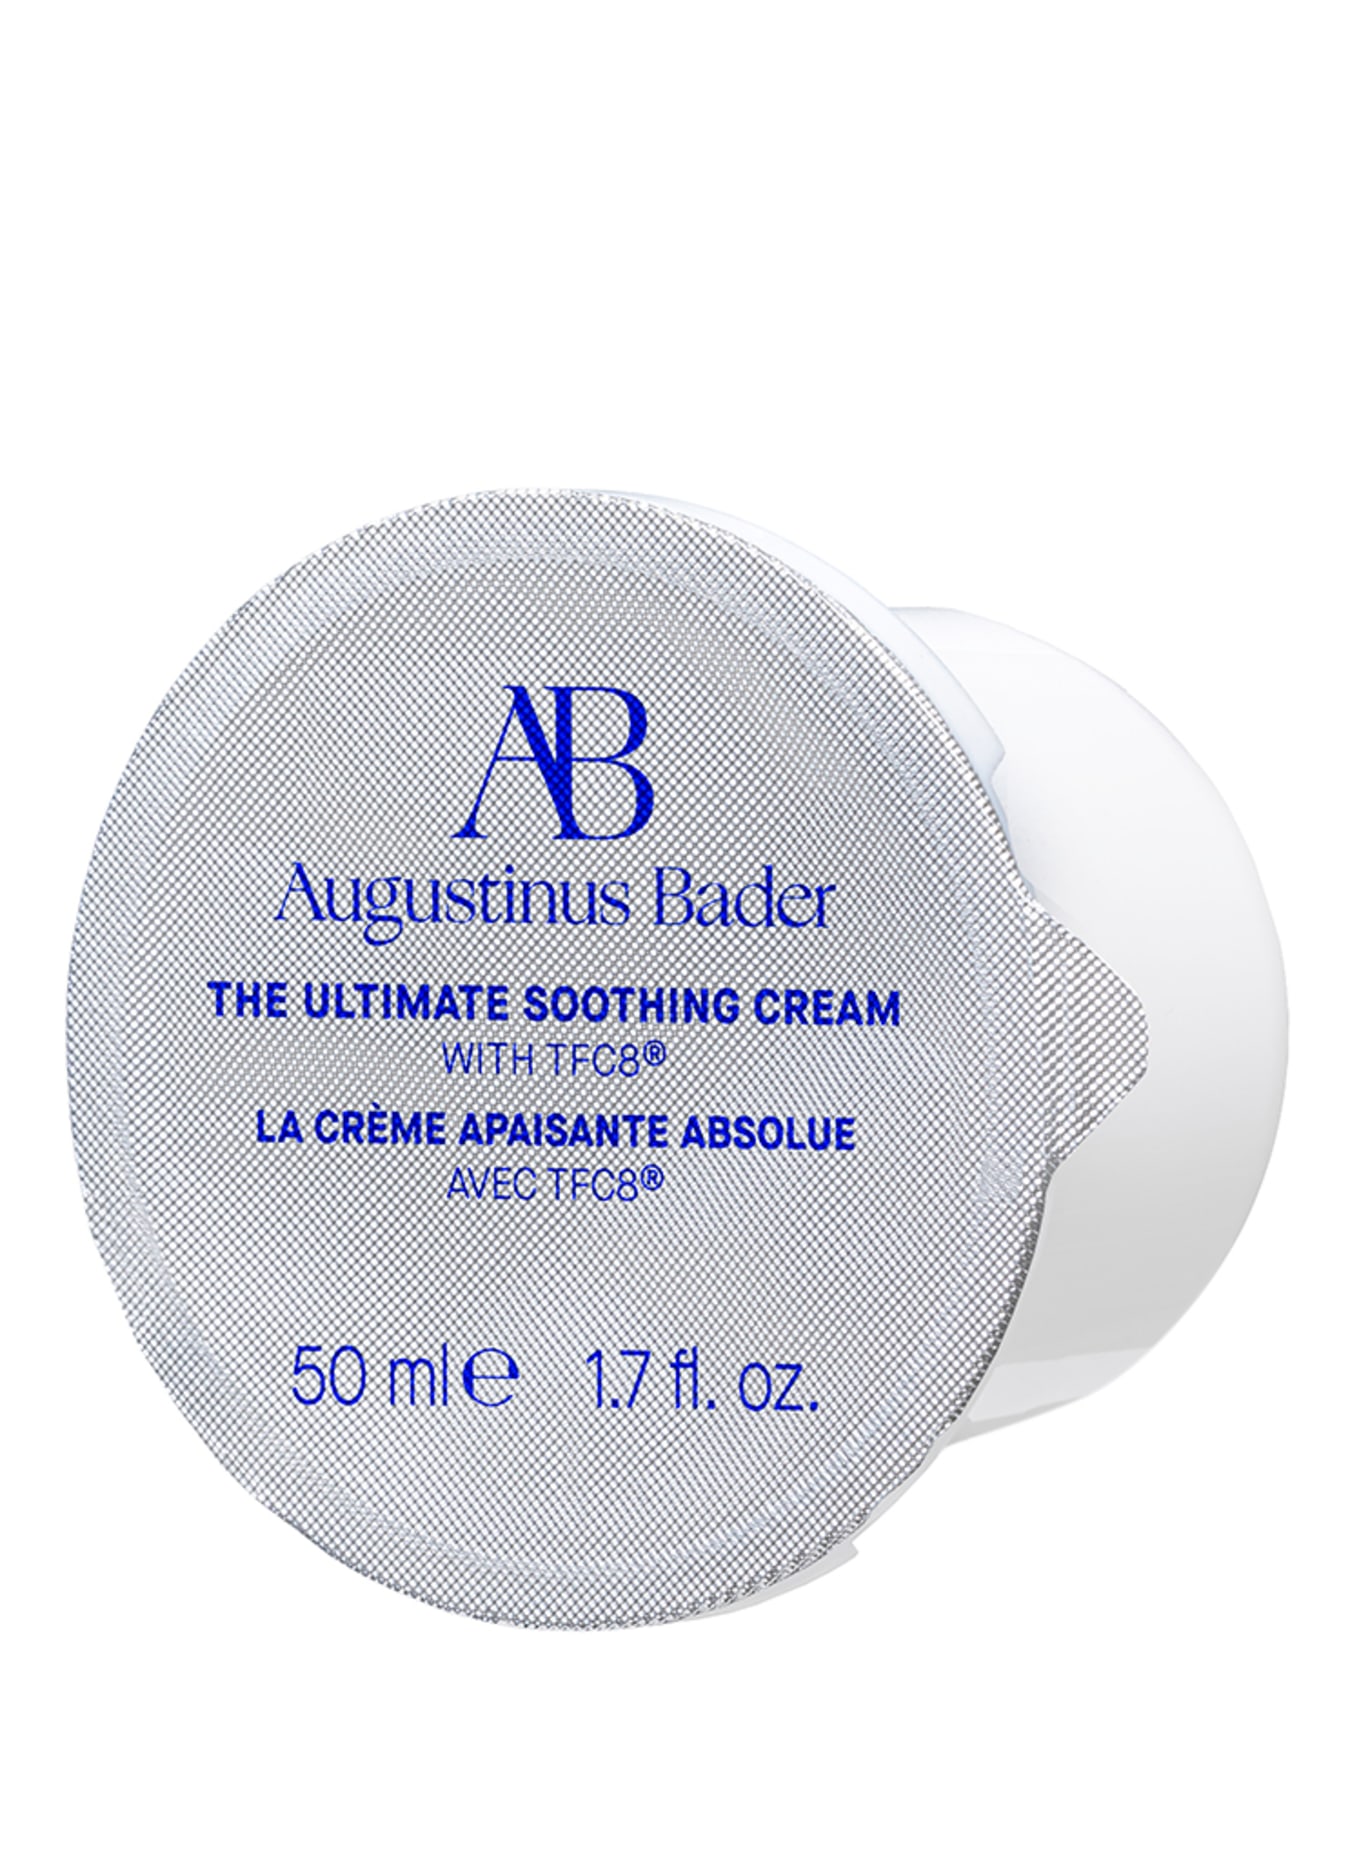 Augustinus Bader THE ULTIMATE SOOTHING CREAM REFILL (Obrazek 1)